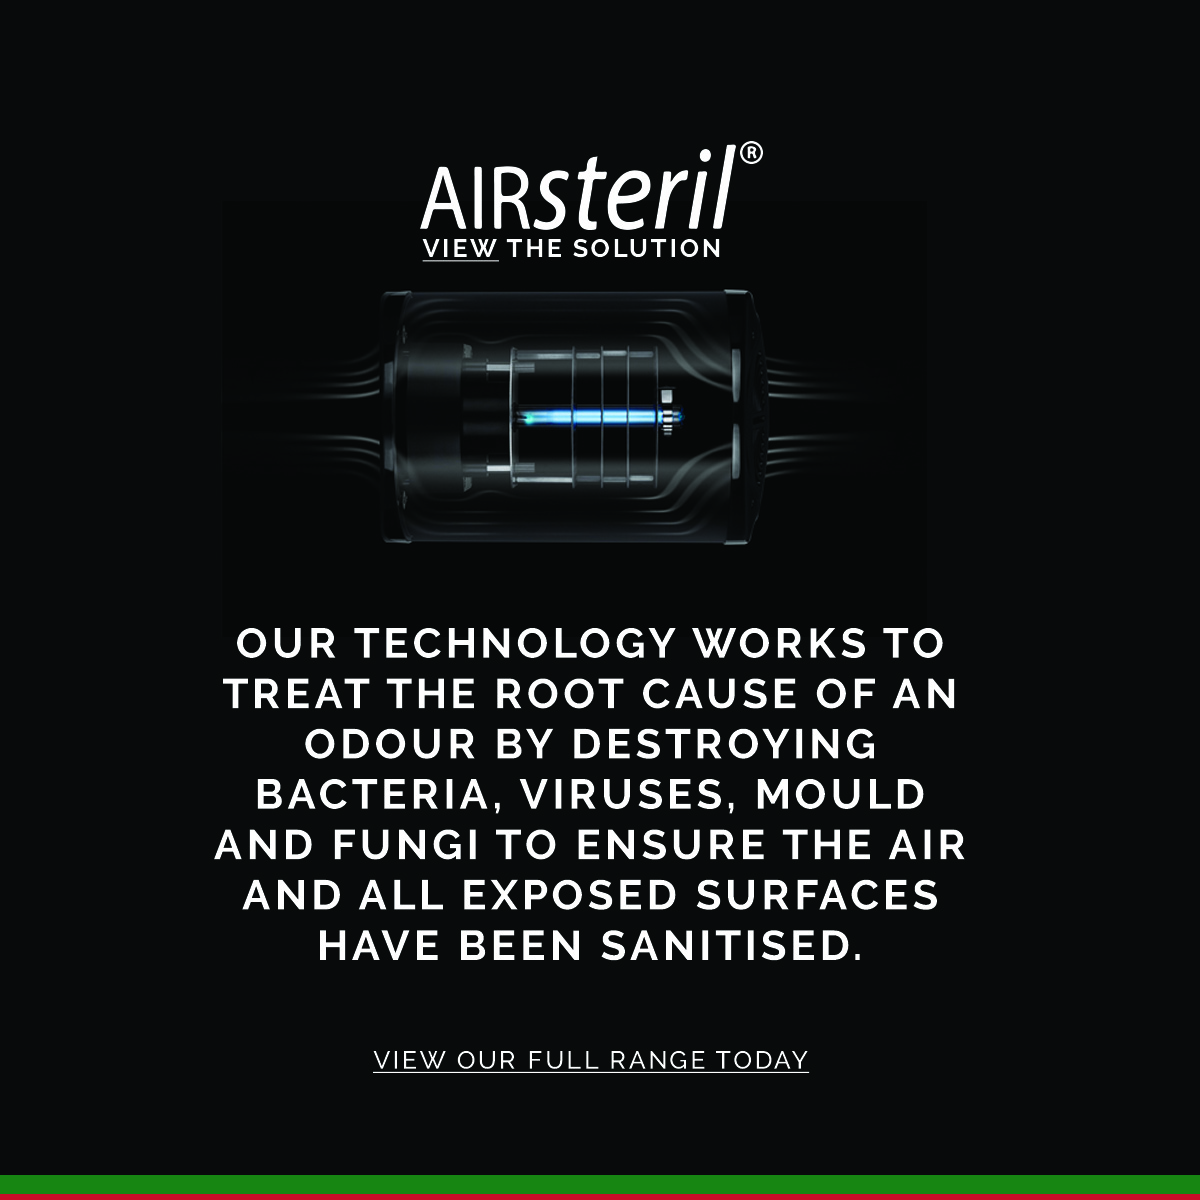 #infectioncontrol #killbacteria #airsteril #odourcontrol #workplacehealthandsafety #healthandsafety #odourissues #eliminatesmells
Find us at airsteril.co.uk